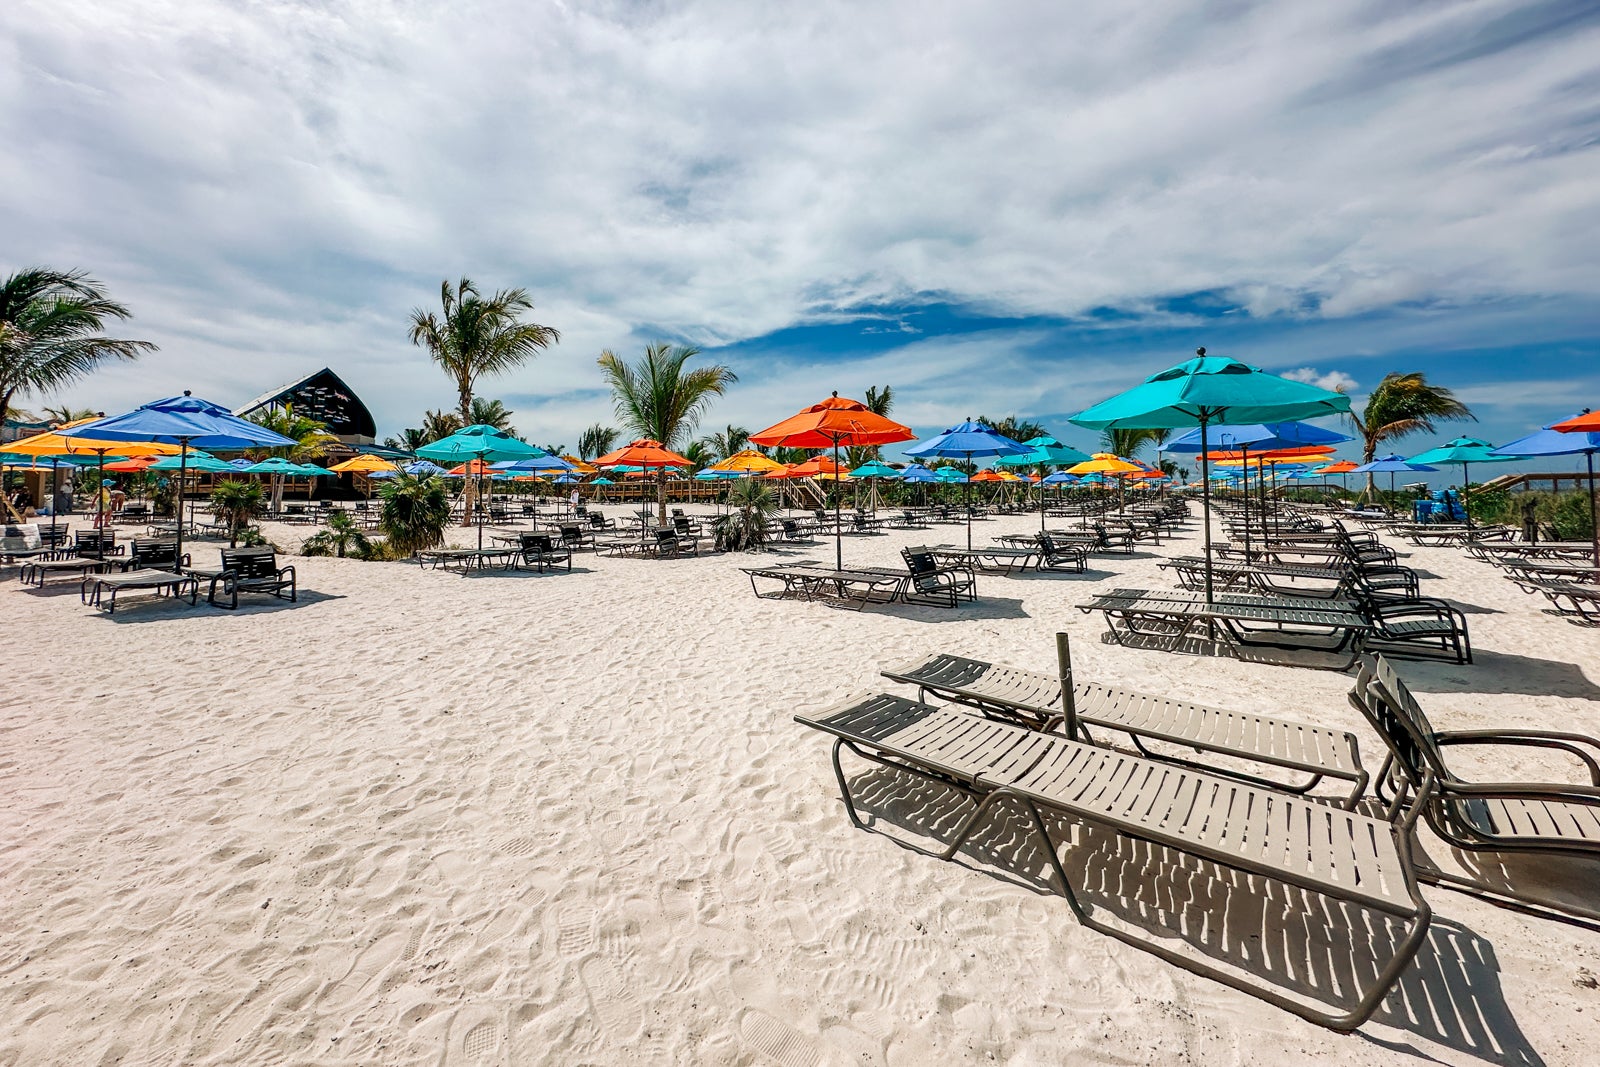 A beach with lounge chairs, colorful umbrellas and palm trees